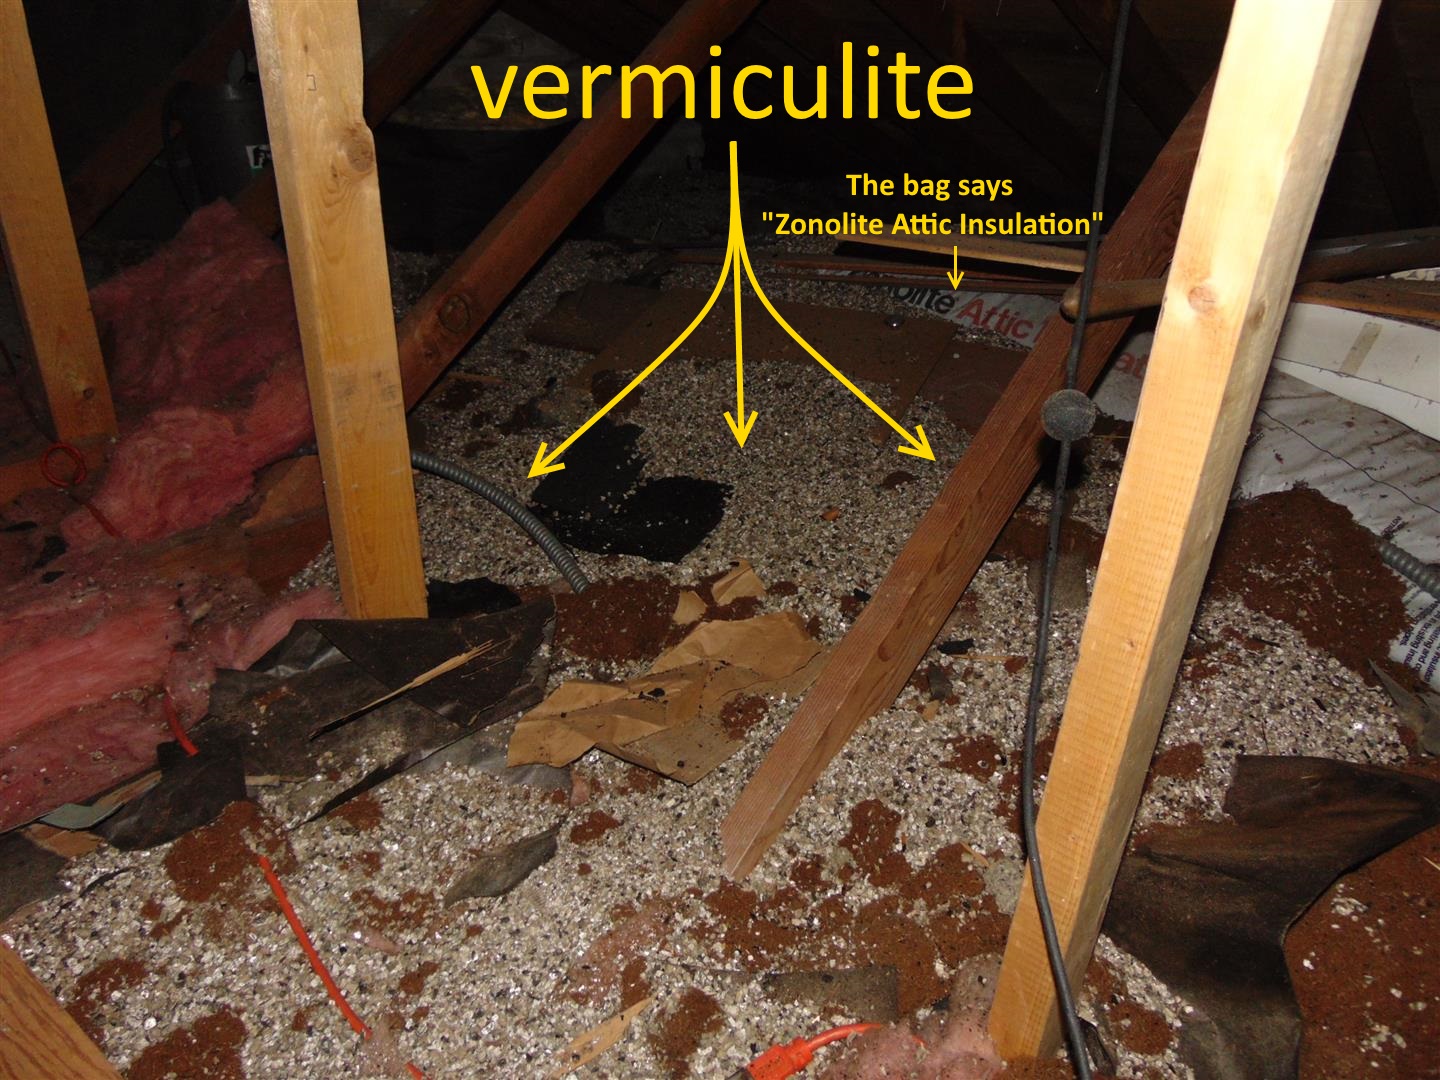 New Tool Determines If Vermiculite Insulation Contains Asbestos